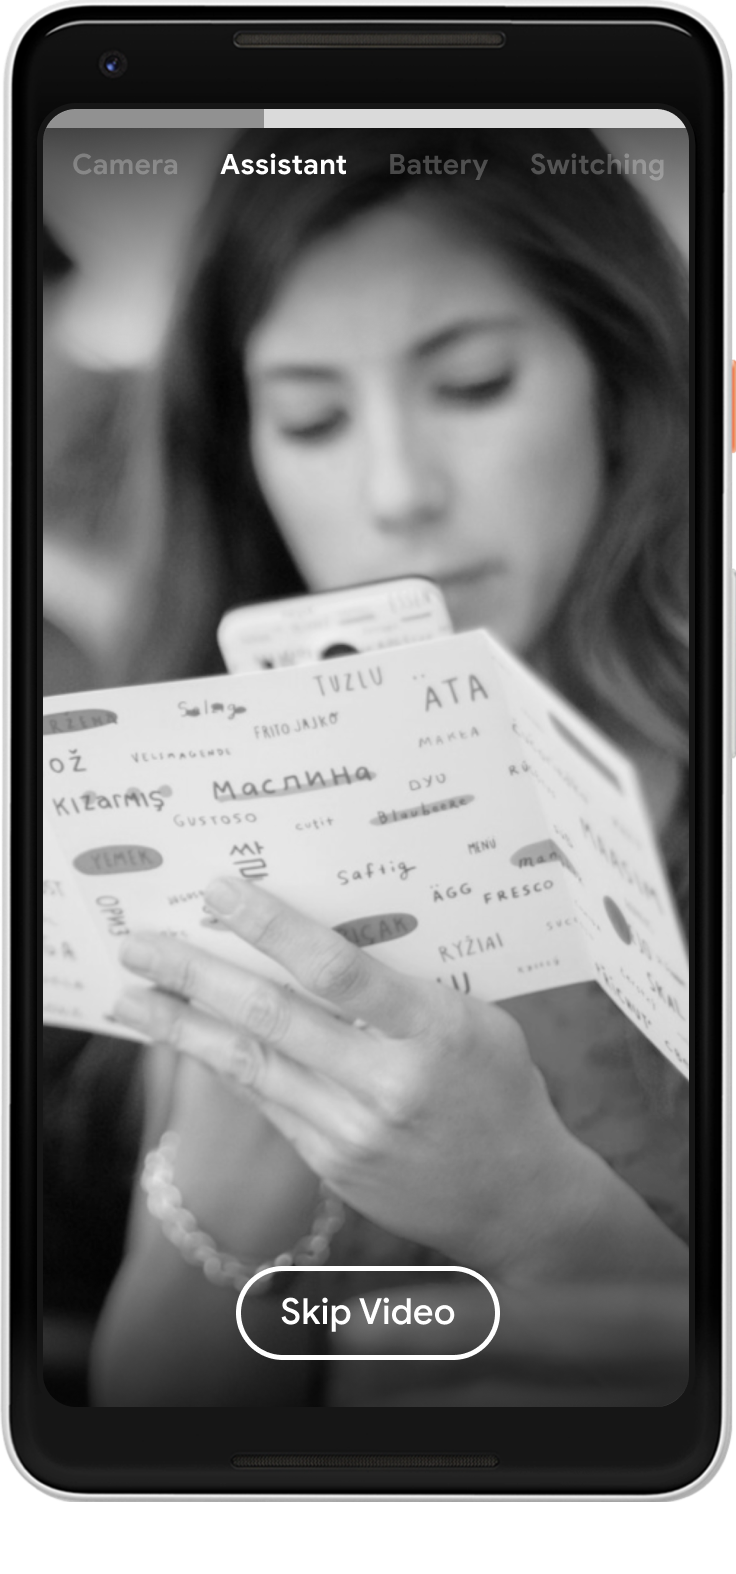 Start of the Assistant video, with a woman scanning a multi-language brochure with her phone